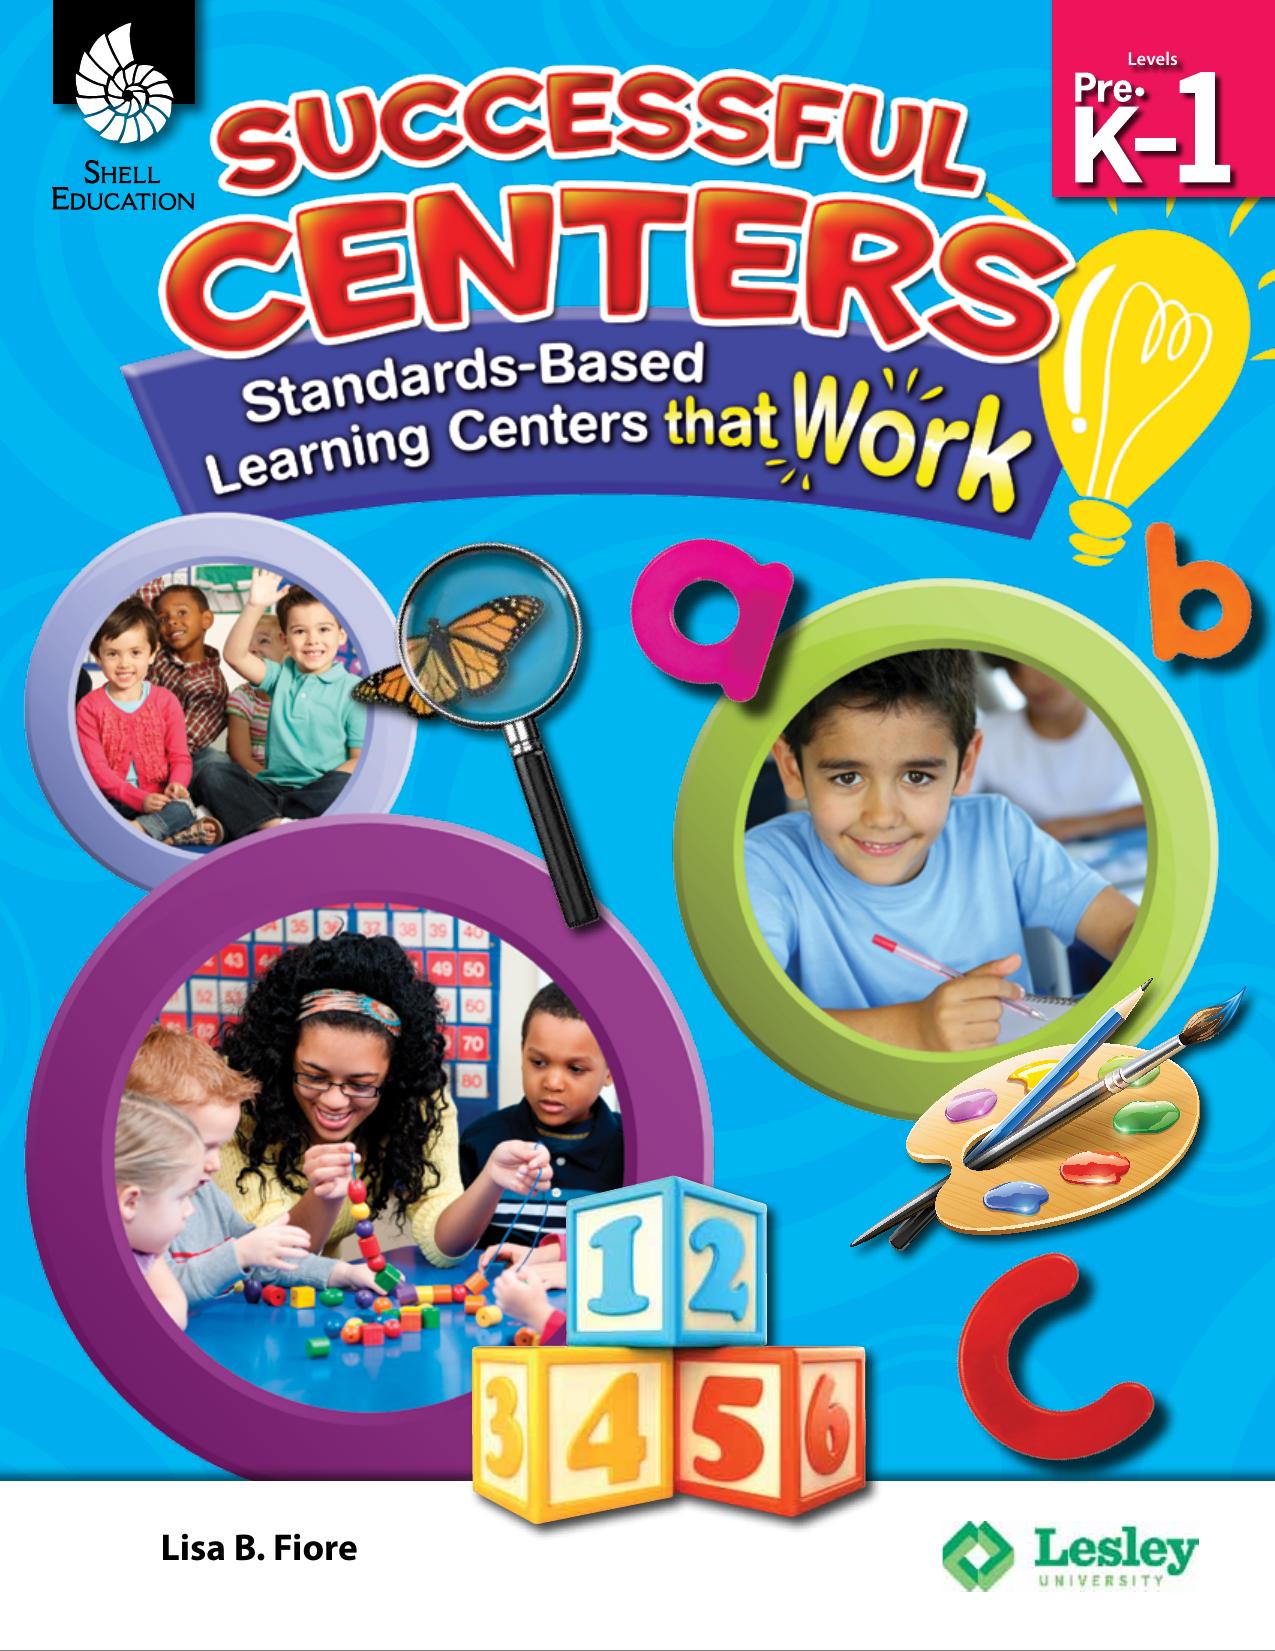 Successful Centers: Standards-Based Learning Centers That Work by Lisa B. Fiore